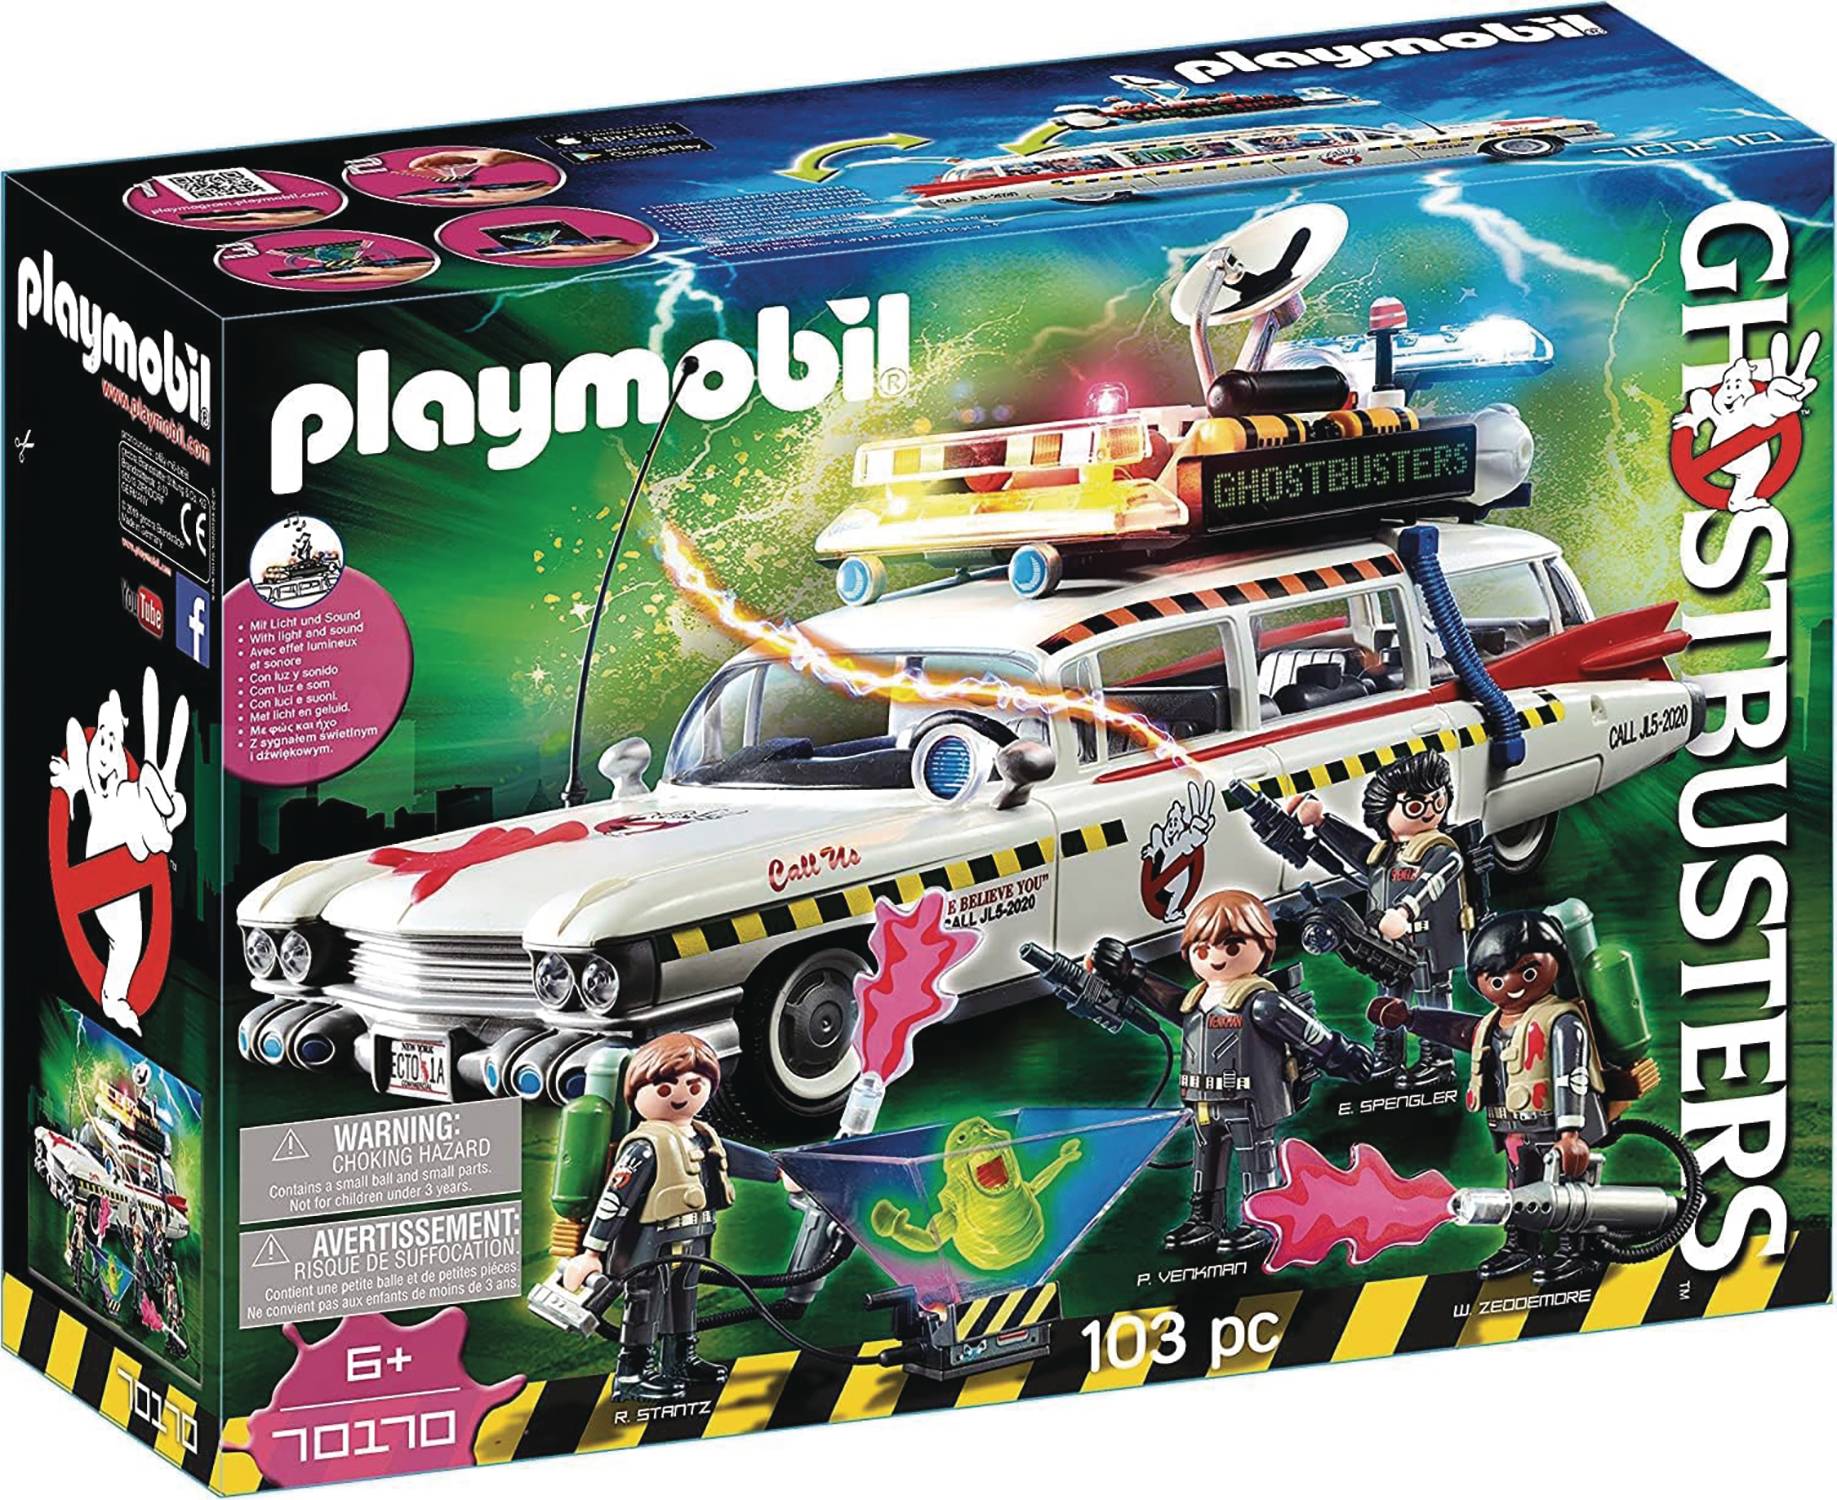 PLAYMOBIL GHOSTBUSTERS ECTO-1A PLAY-SET